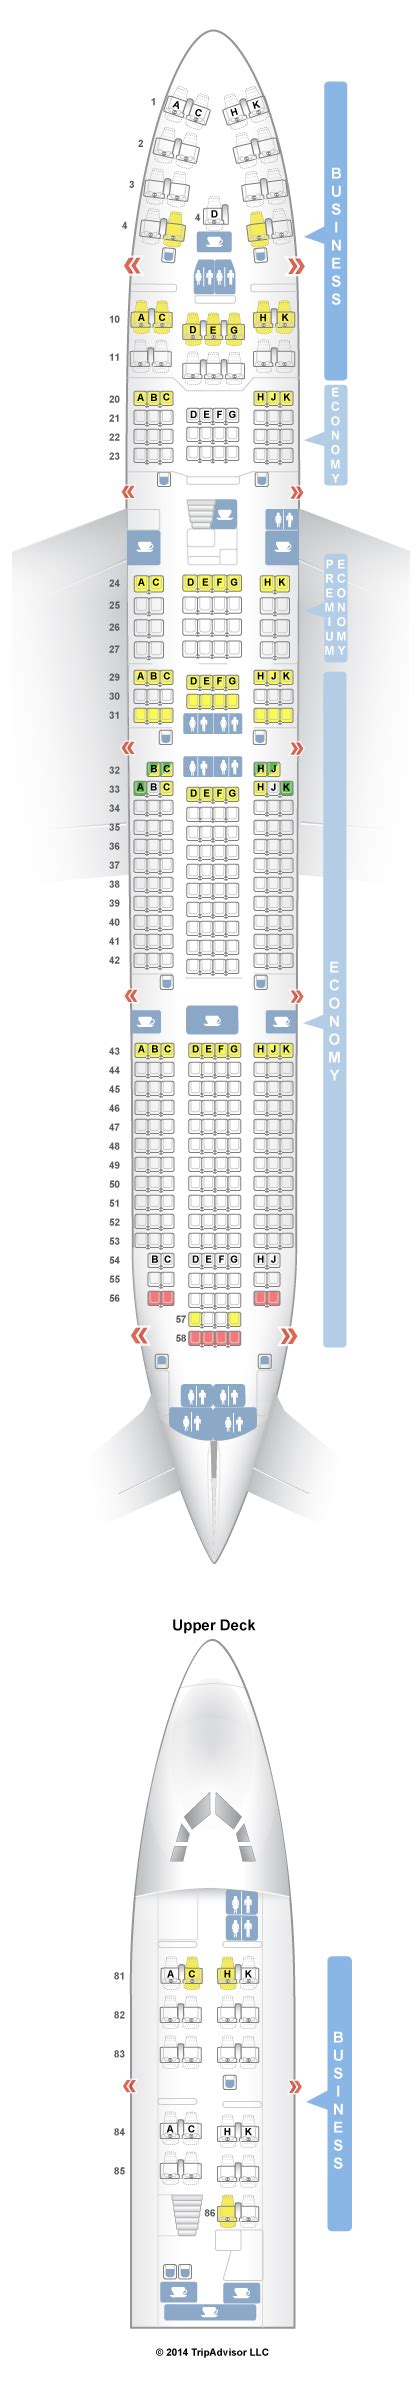 For your next Lufthansa flight, use this seating chart to get the most comfortable seats, legroom, and recline on . ... Boeing 747-400 (744) Layout 2; Boeing 747-8 (748) . 